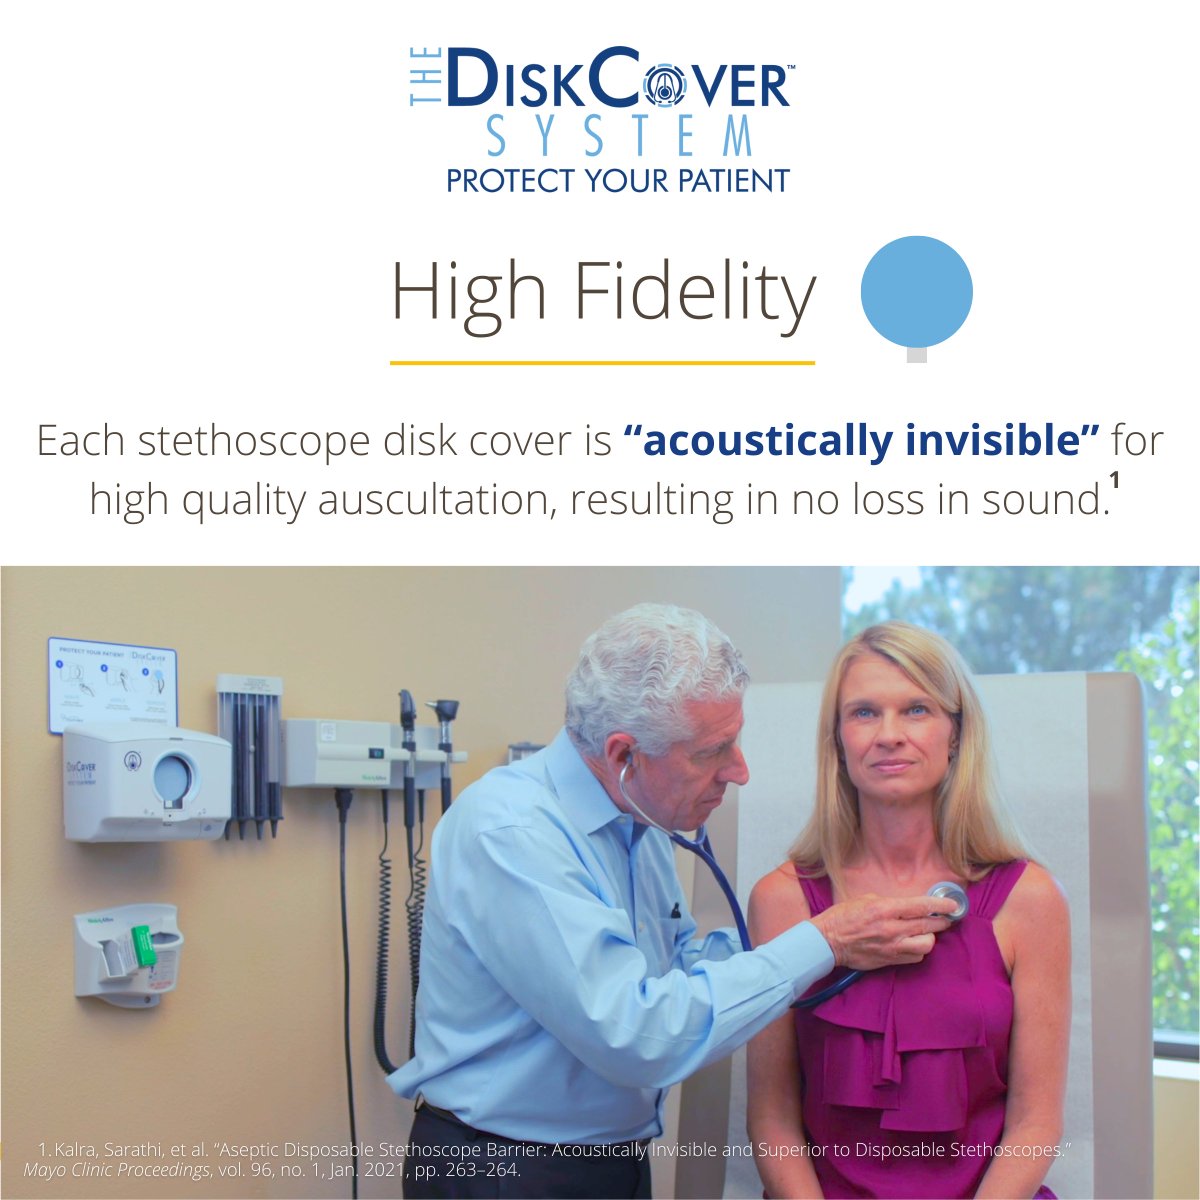 🔊 The DiskCover System's aseptic stethoscope disk cover barriers offer High Fidelity.  Disk covers are acoustically invisible and have NO negative impact on sound quality during auscultation.  
#fidelity #protection #infectionprevention #healthcare #innovation